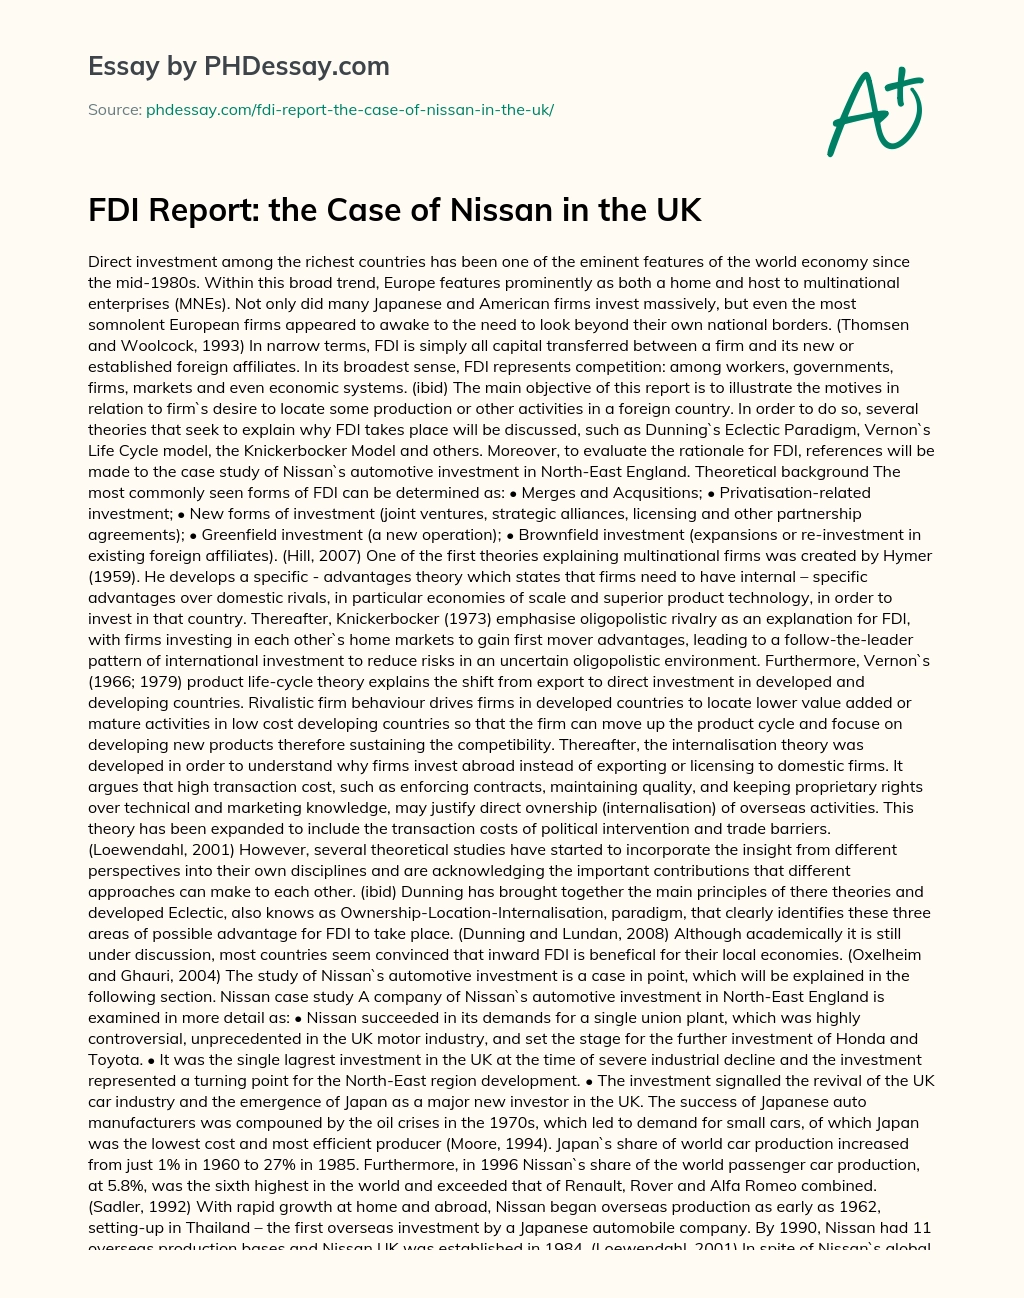 the Case of Nissan in the UK essay